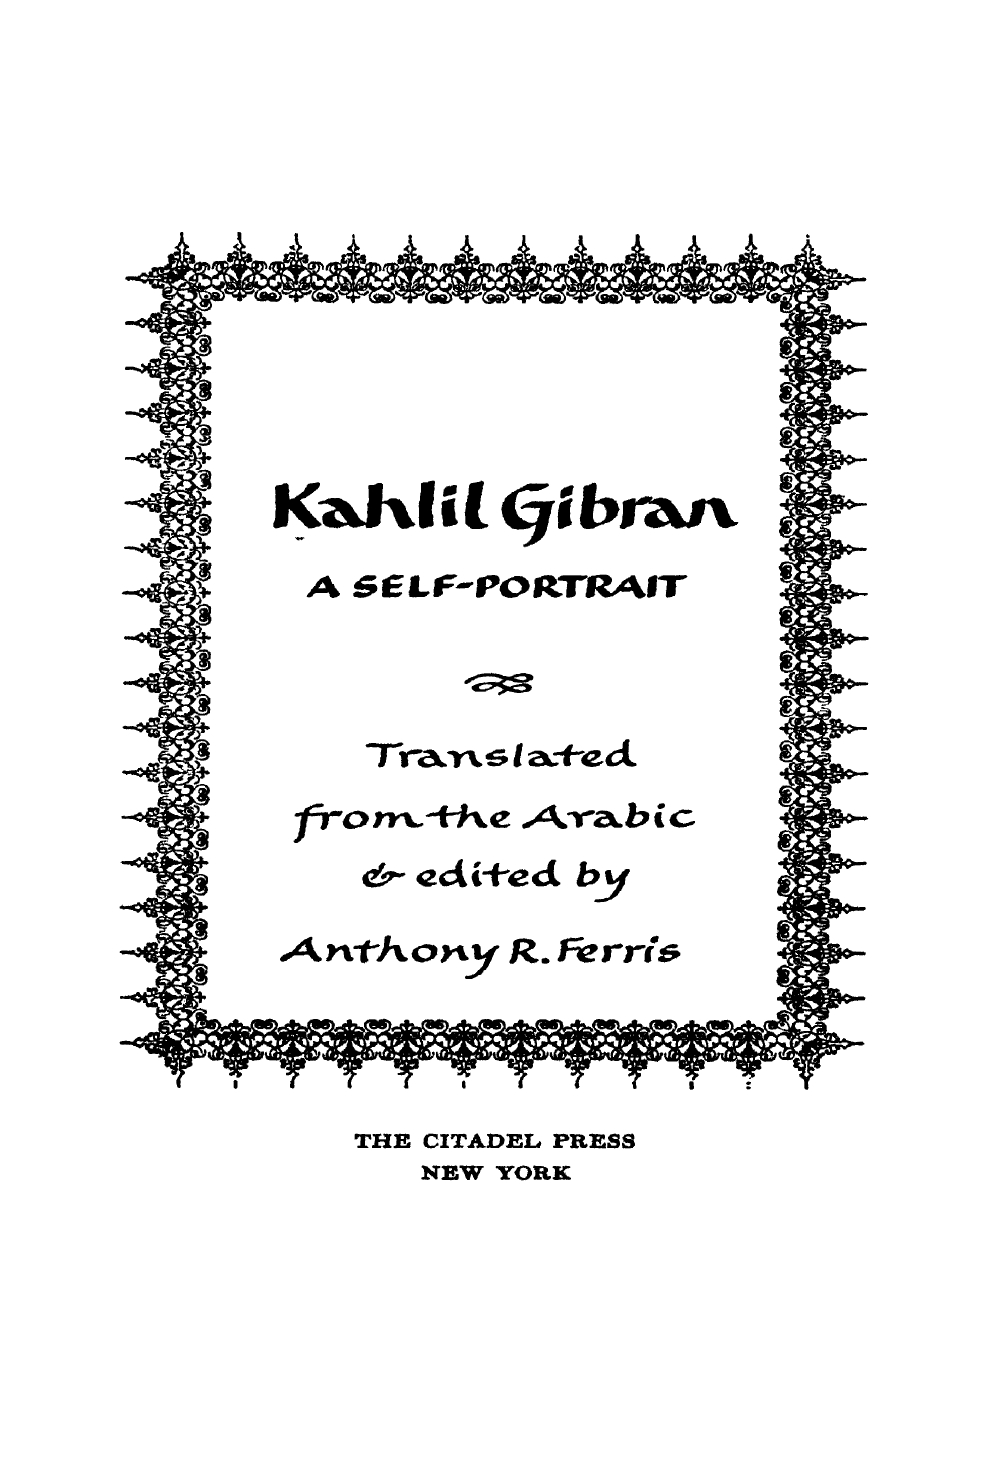 Kahlil Gibran: A Self-Portrait, Translated from the Arabic and Edited by Anthony R. Ferris, New York: The Citadel Press, 1959.